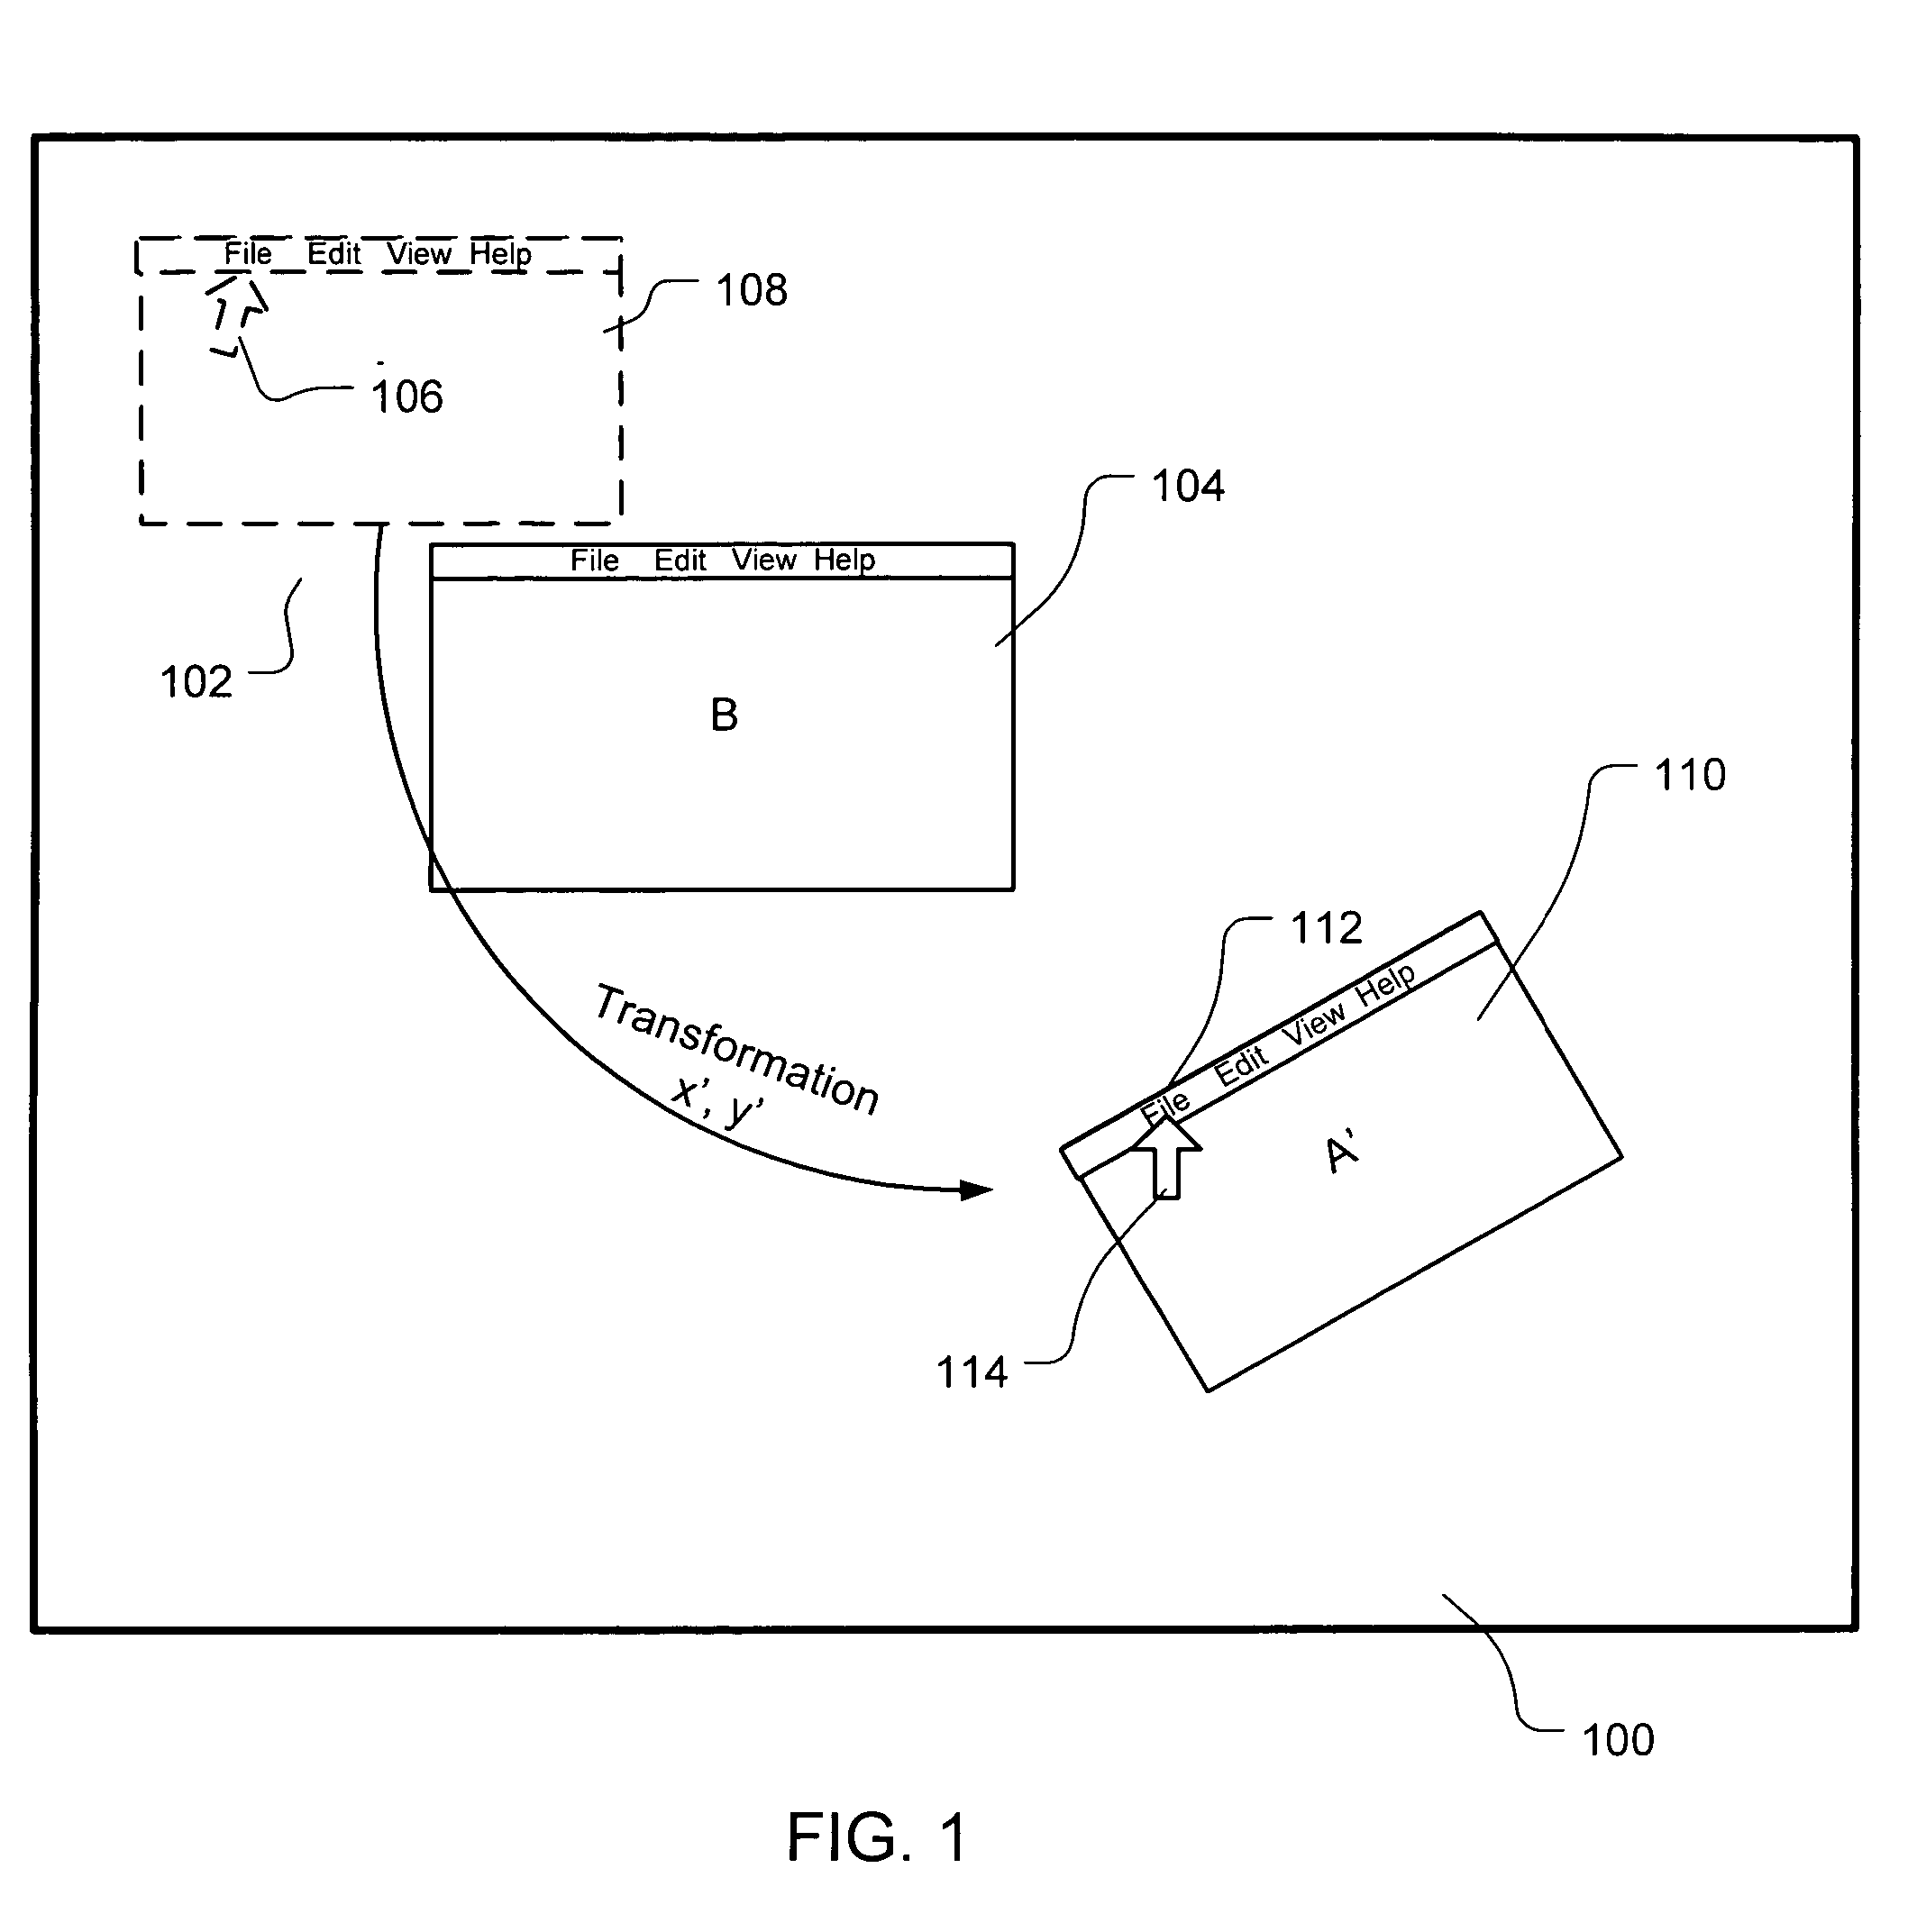 Method and system for redirection of transformed windows